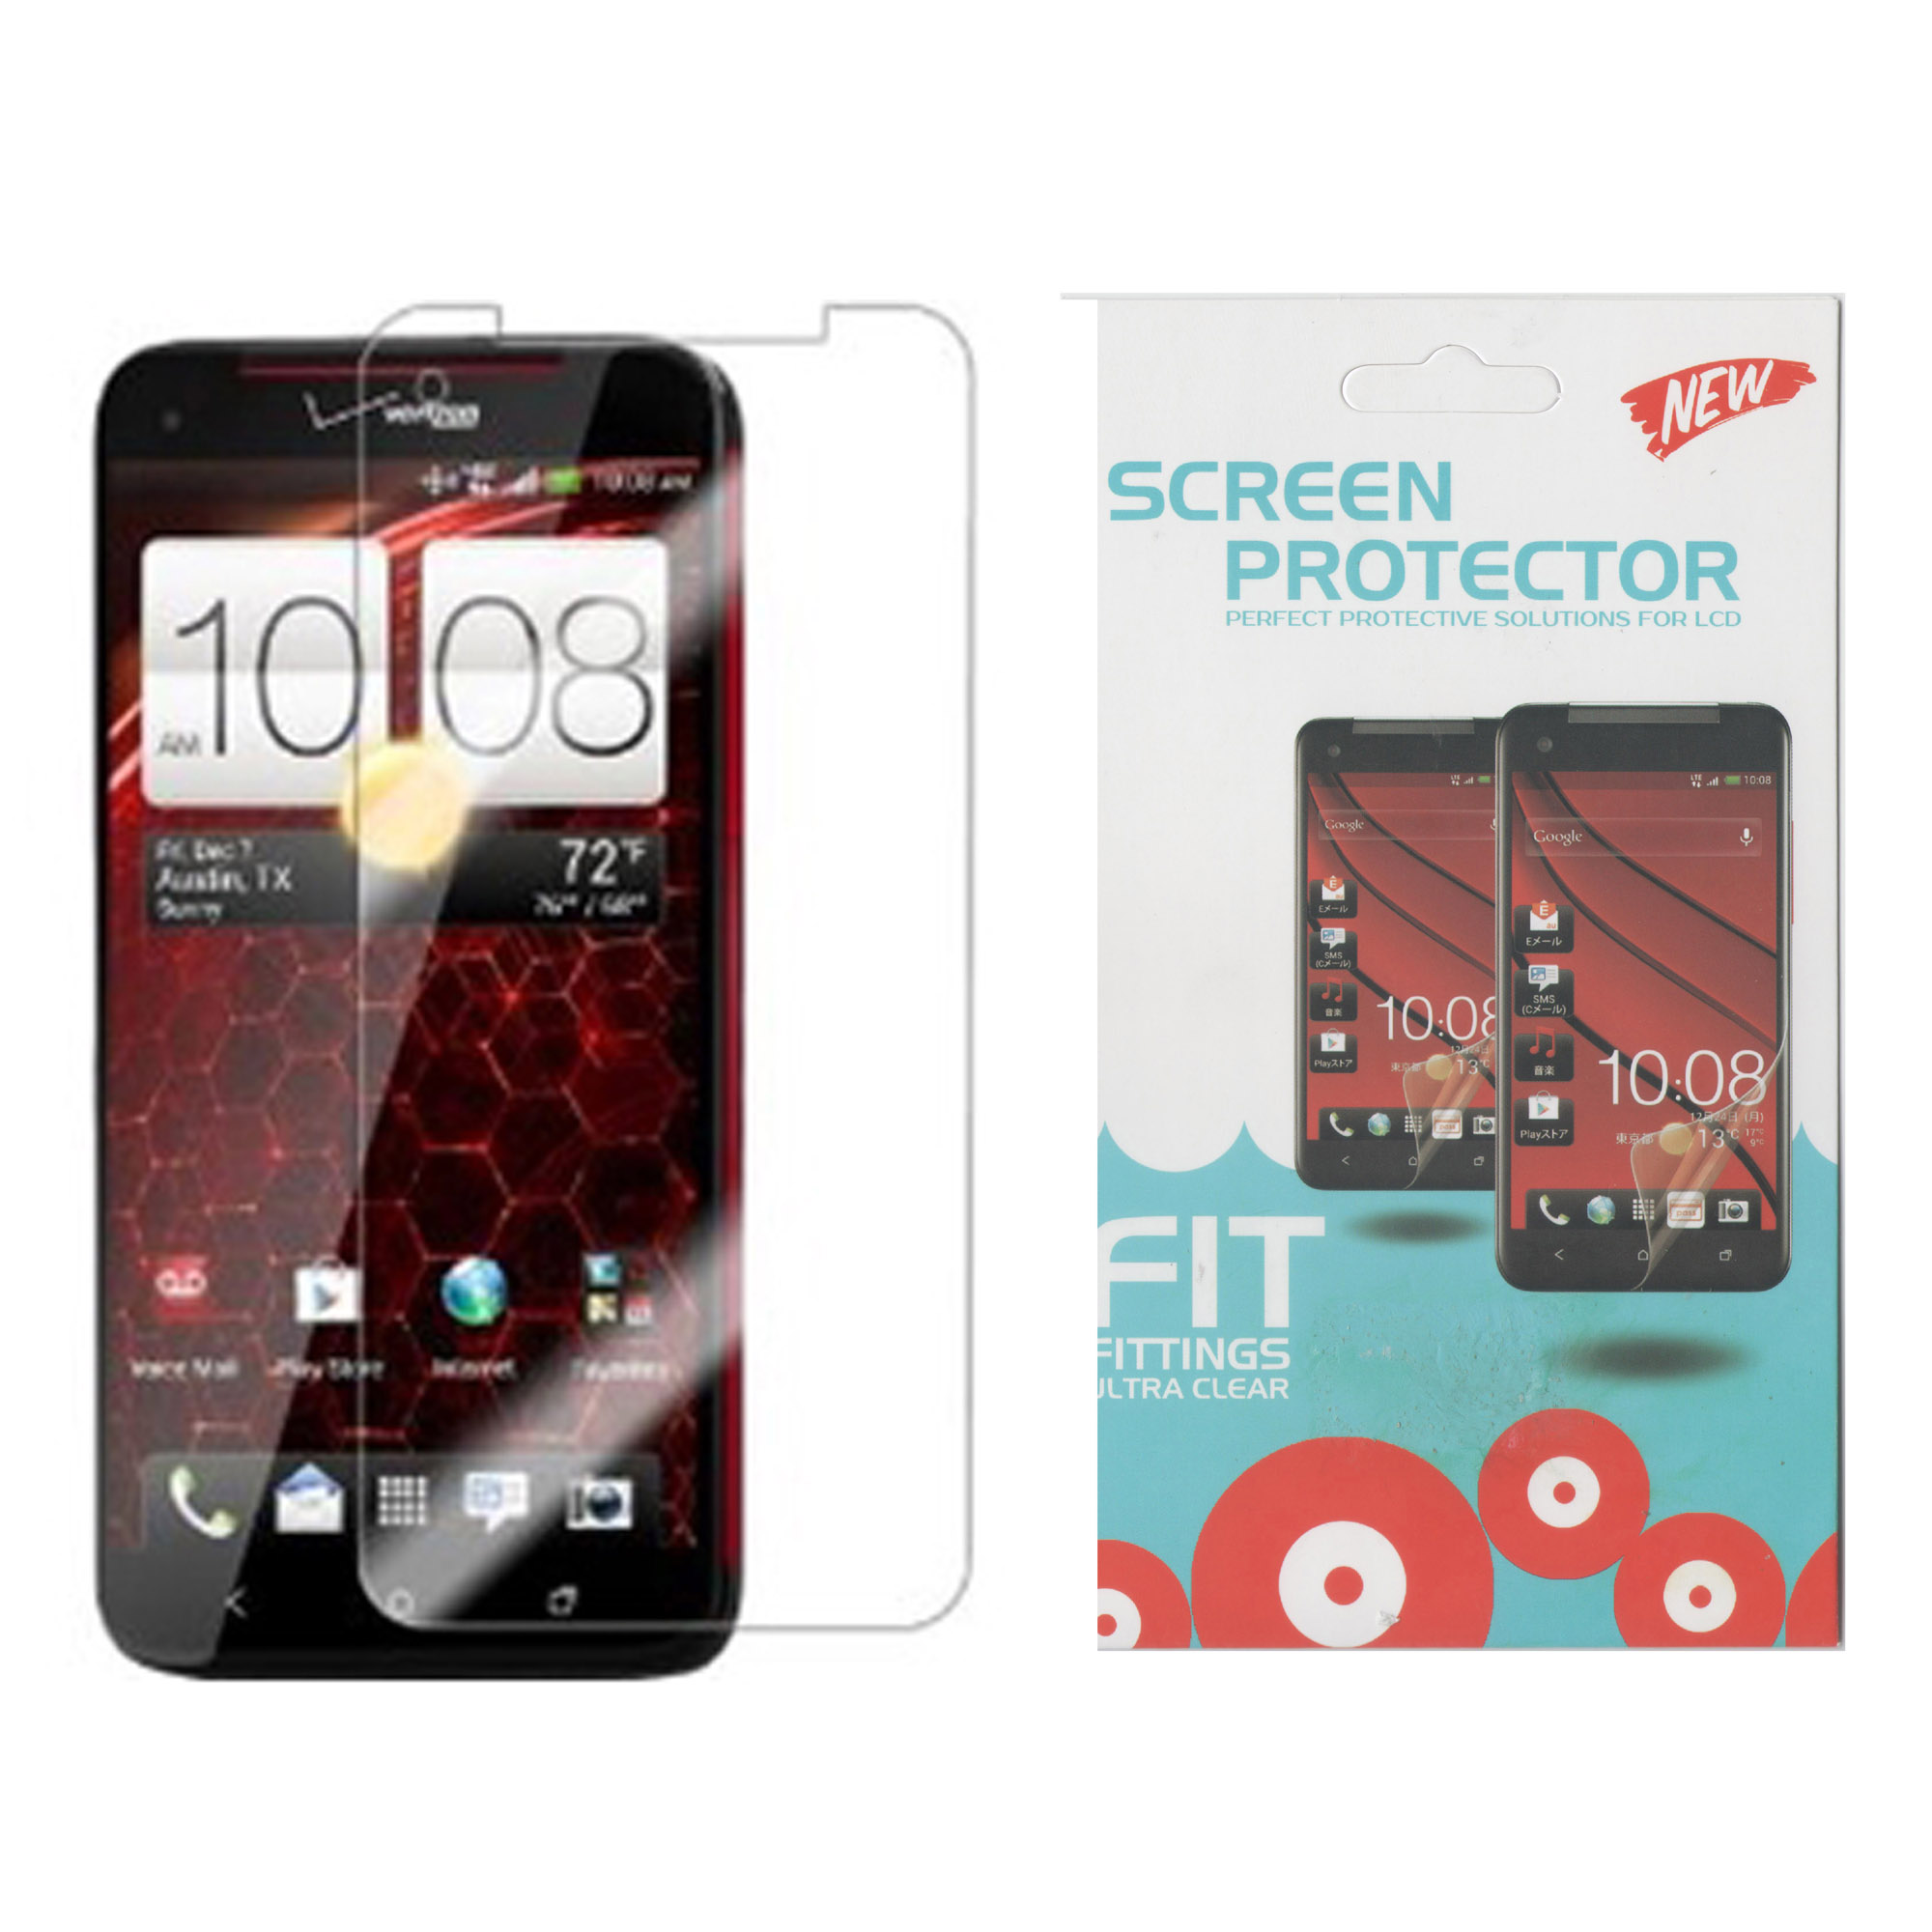 Screen proector for HTC DNA